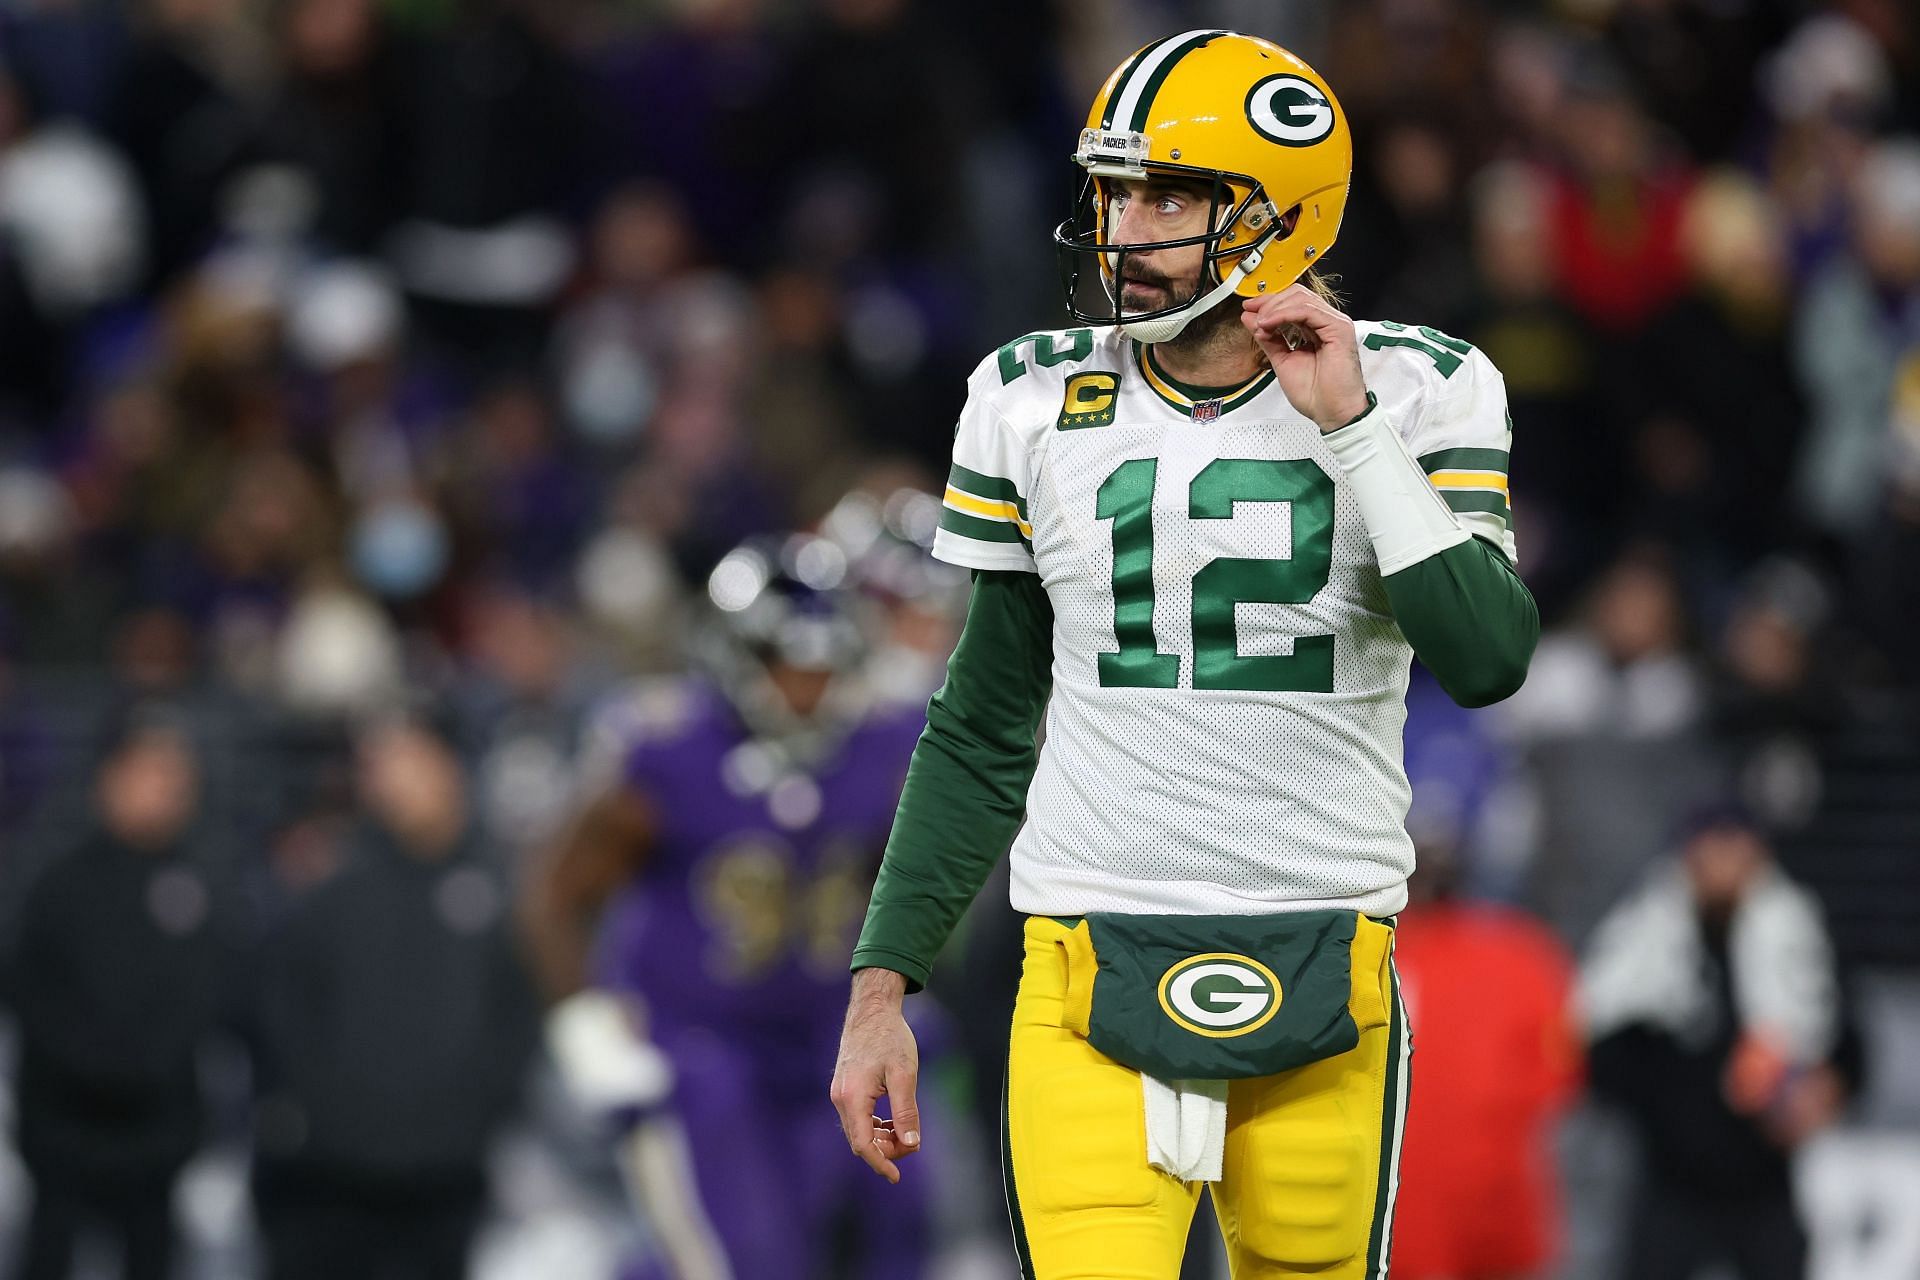 Aaron Rodgers needs to step up in 2022, according to Mike Florio